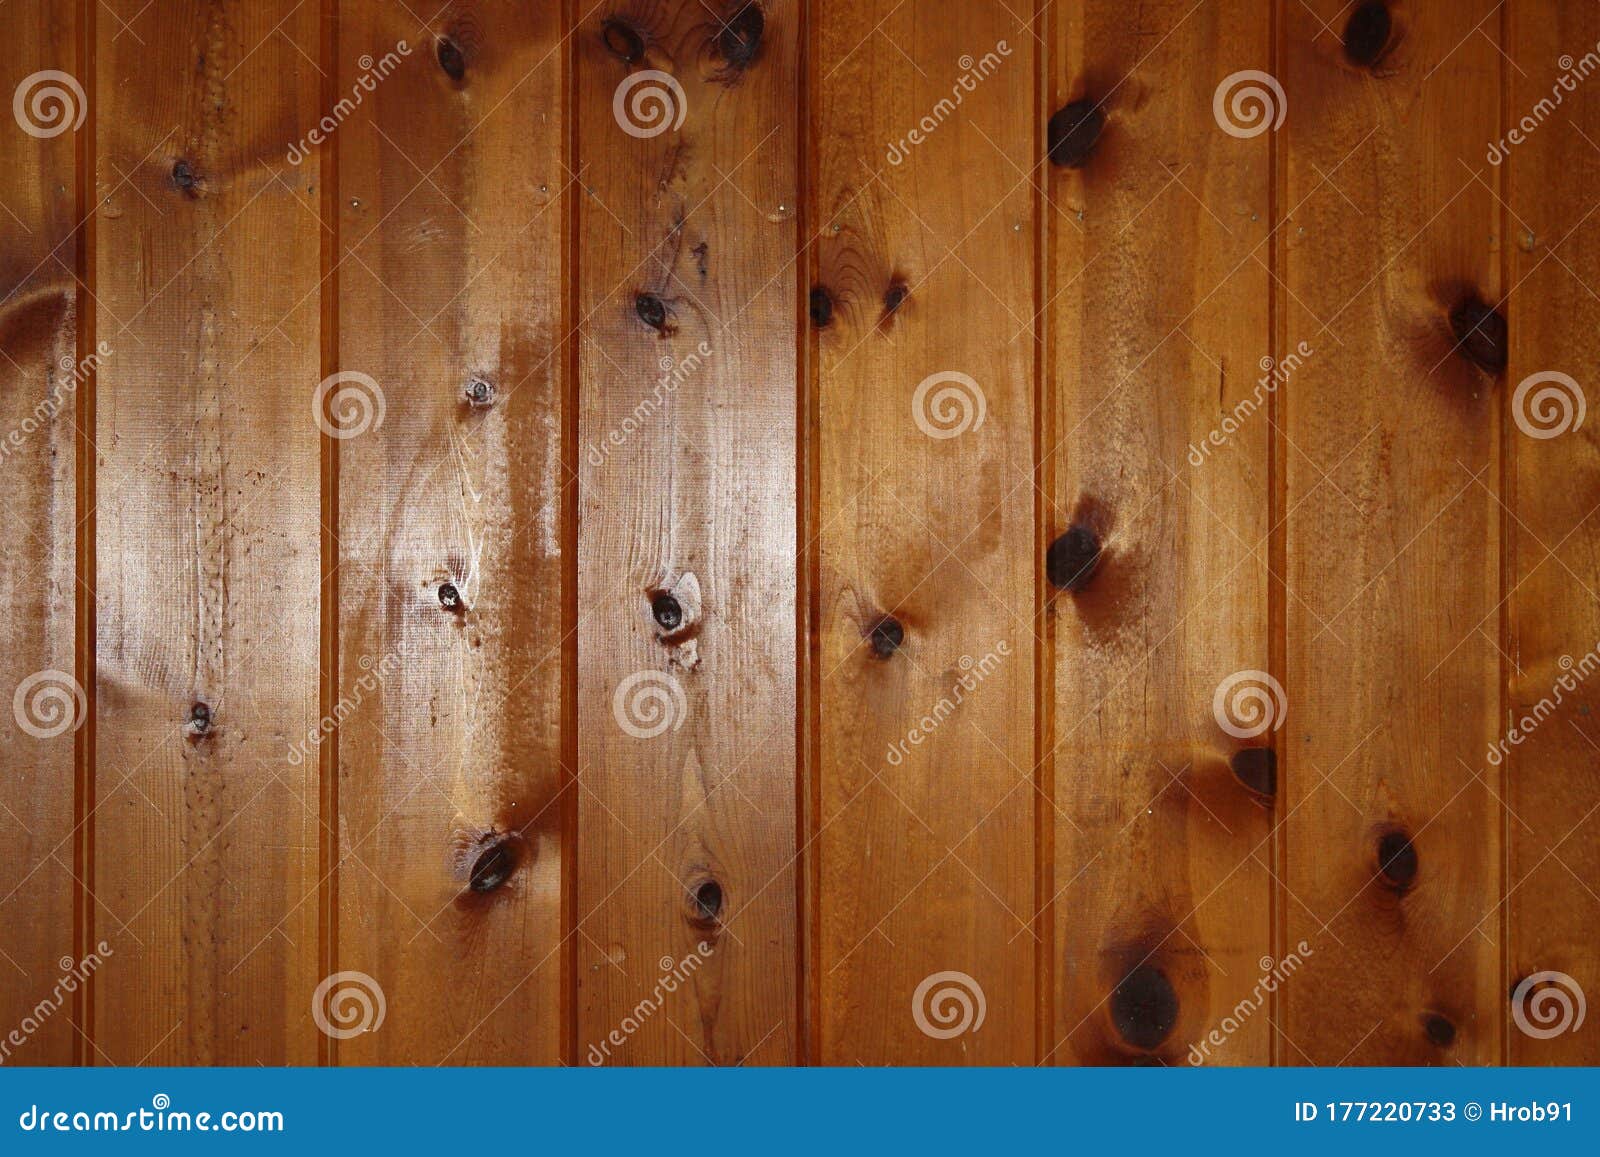 Amazing Collection of Knotty Pine Wood Background for High-Quality Designs